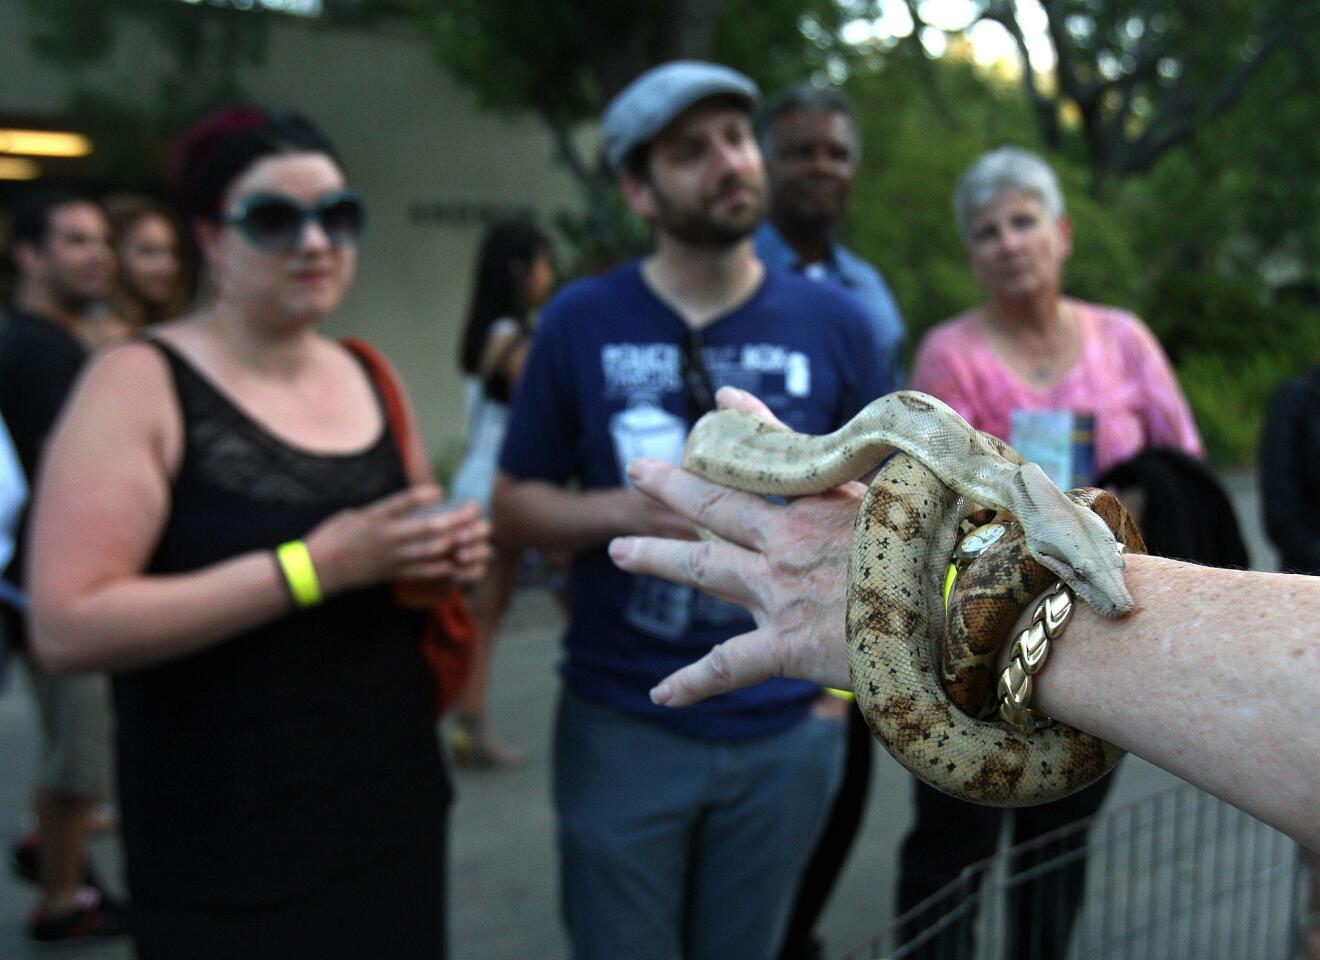 Snake handler Pam Wright shows a sea hog island boa to zoo guests at The Los Angeles Zoo & Botanical Gardens for Roaring Nights at the LA Zoo on Friday, June 27, 2014. The evening at the zoo had an artistry area where people could paint their favorite animal, several animal feedings, a live band, and some animals and reptiles on exhibit.